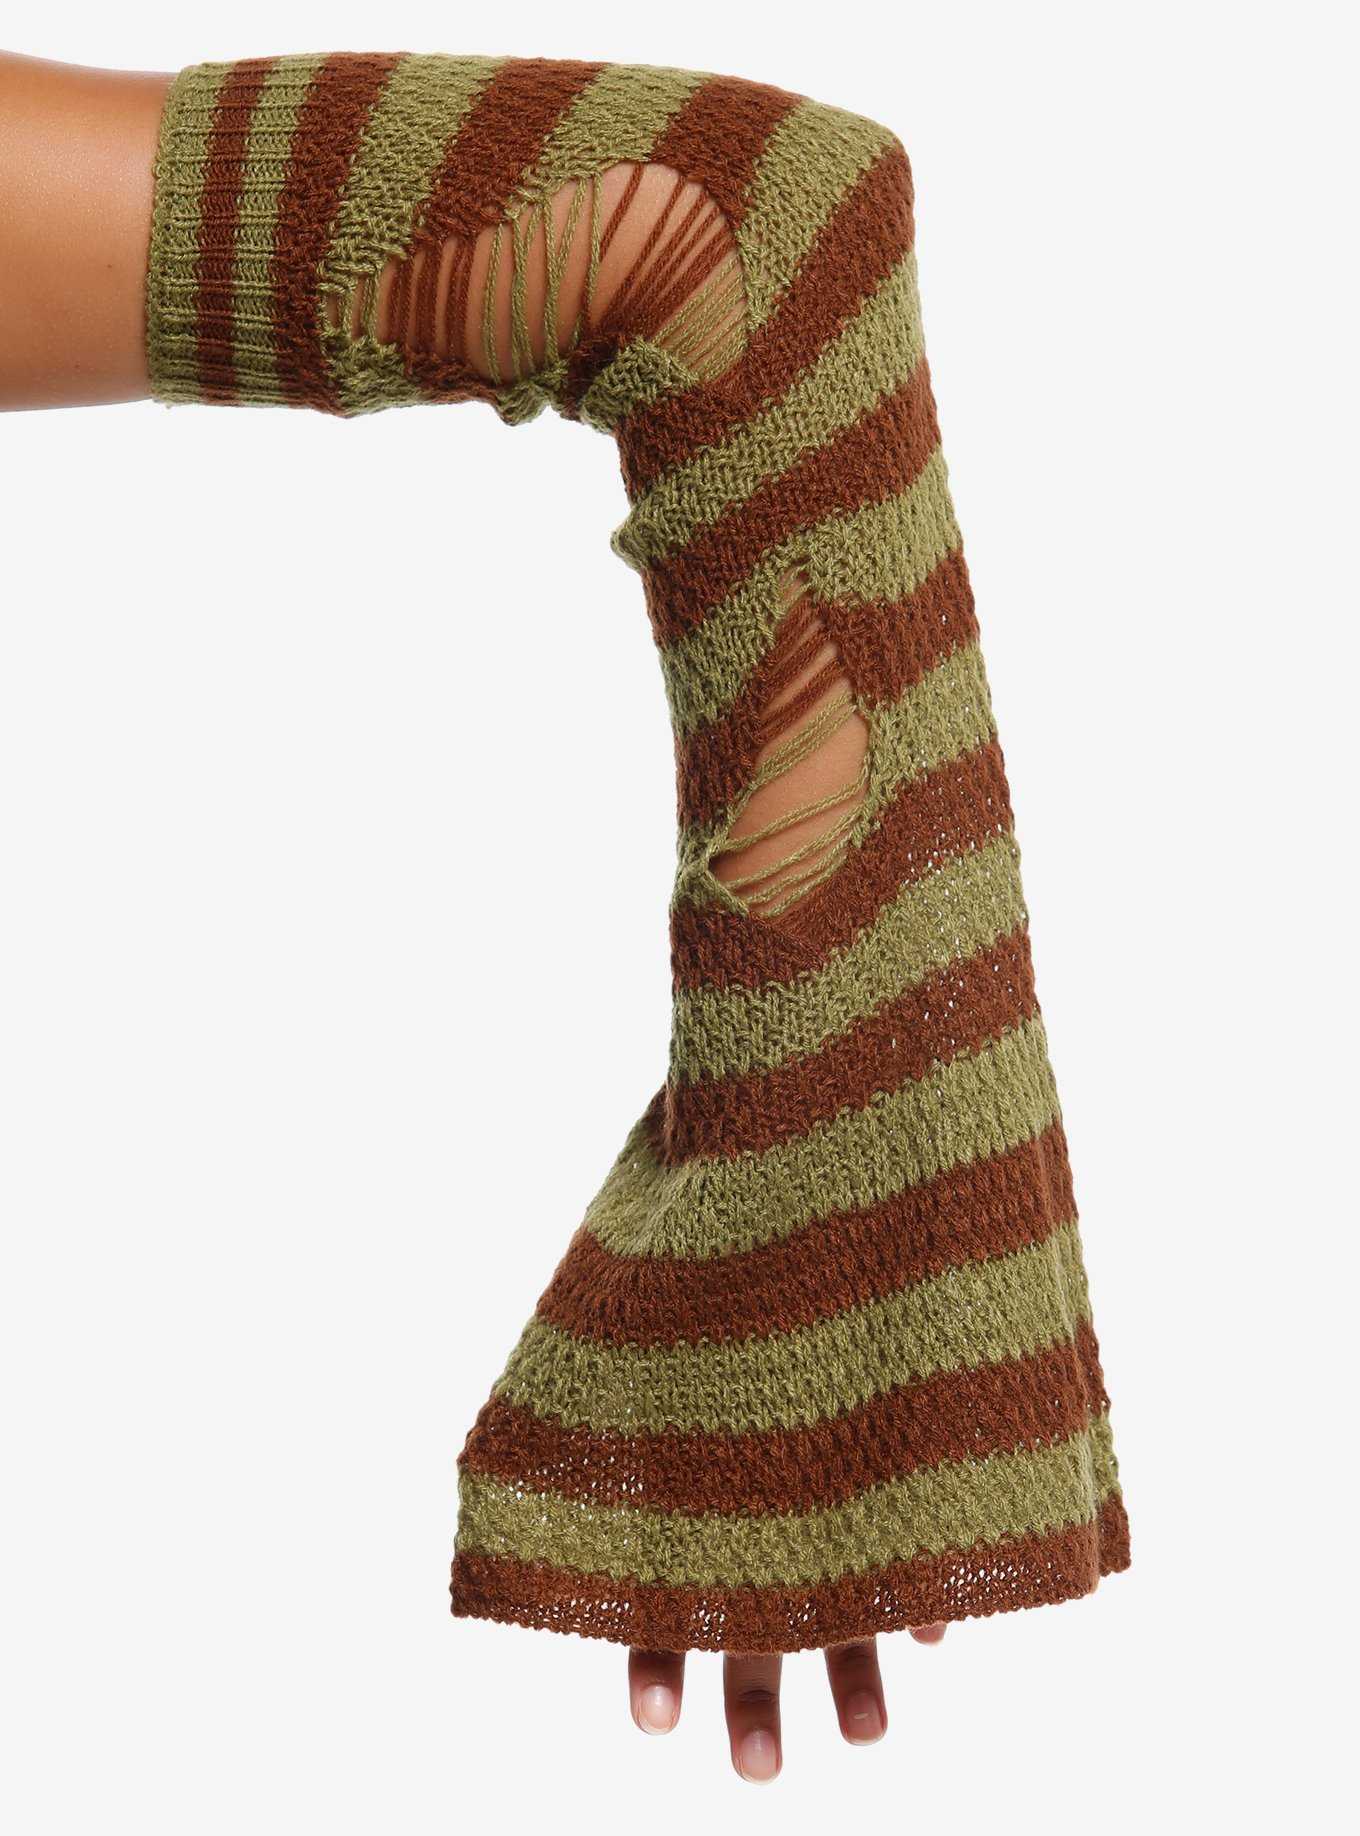 Green & Brown Distressed Knit Flare Arm Warmers, , hi-res